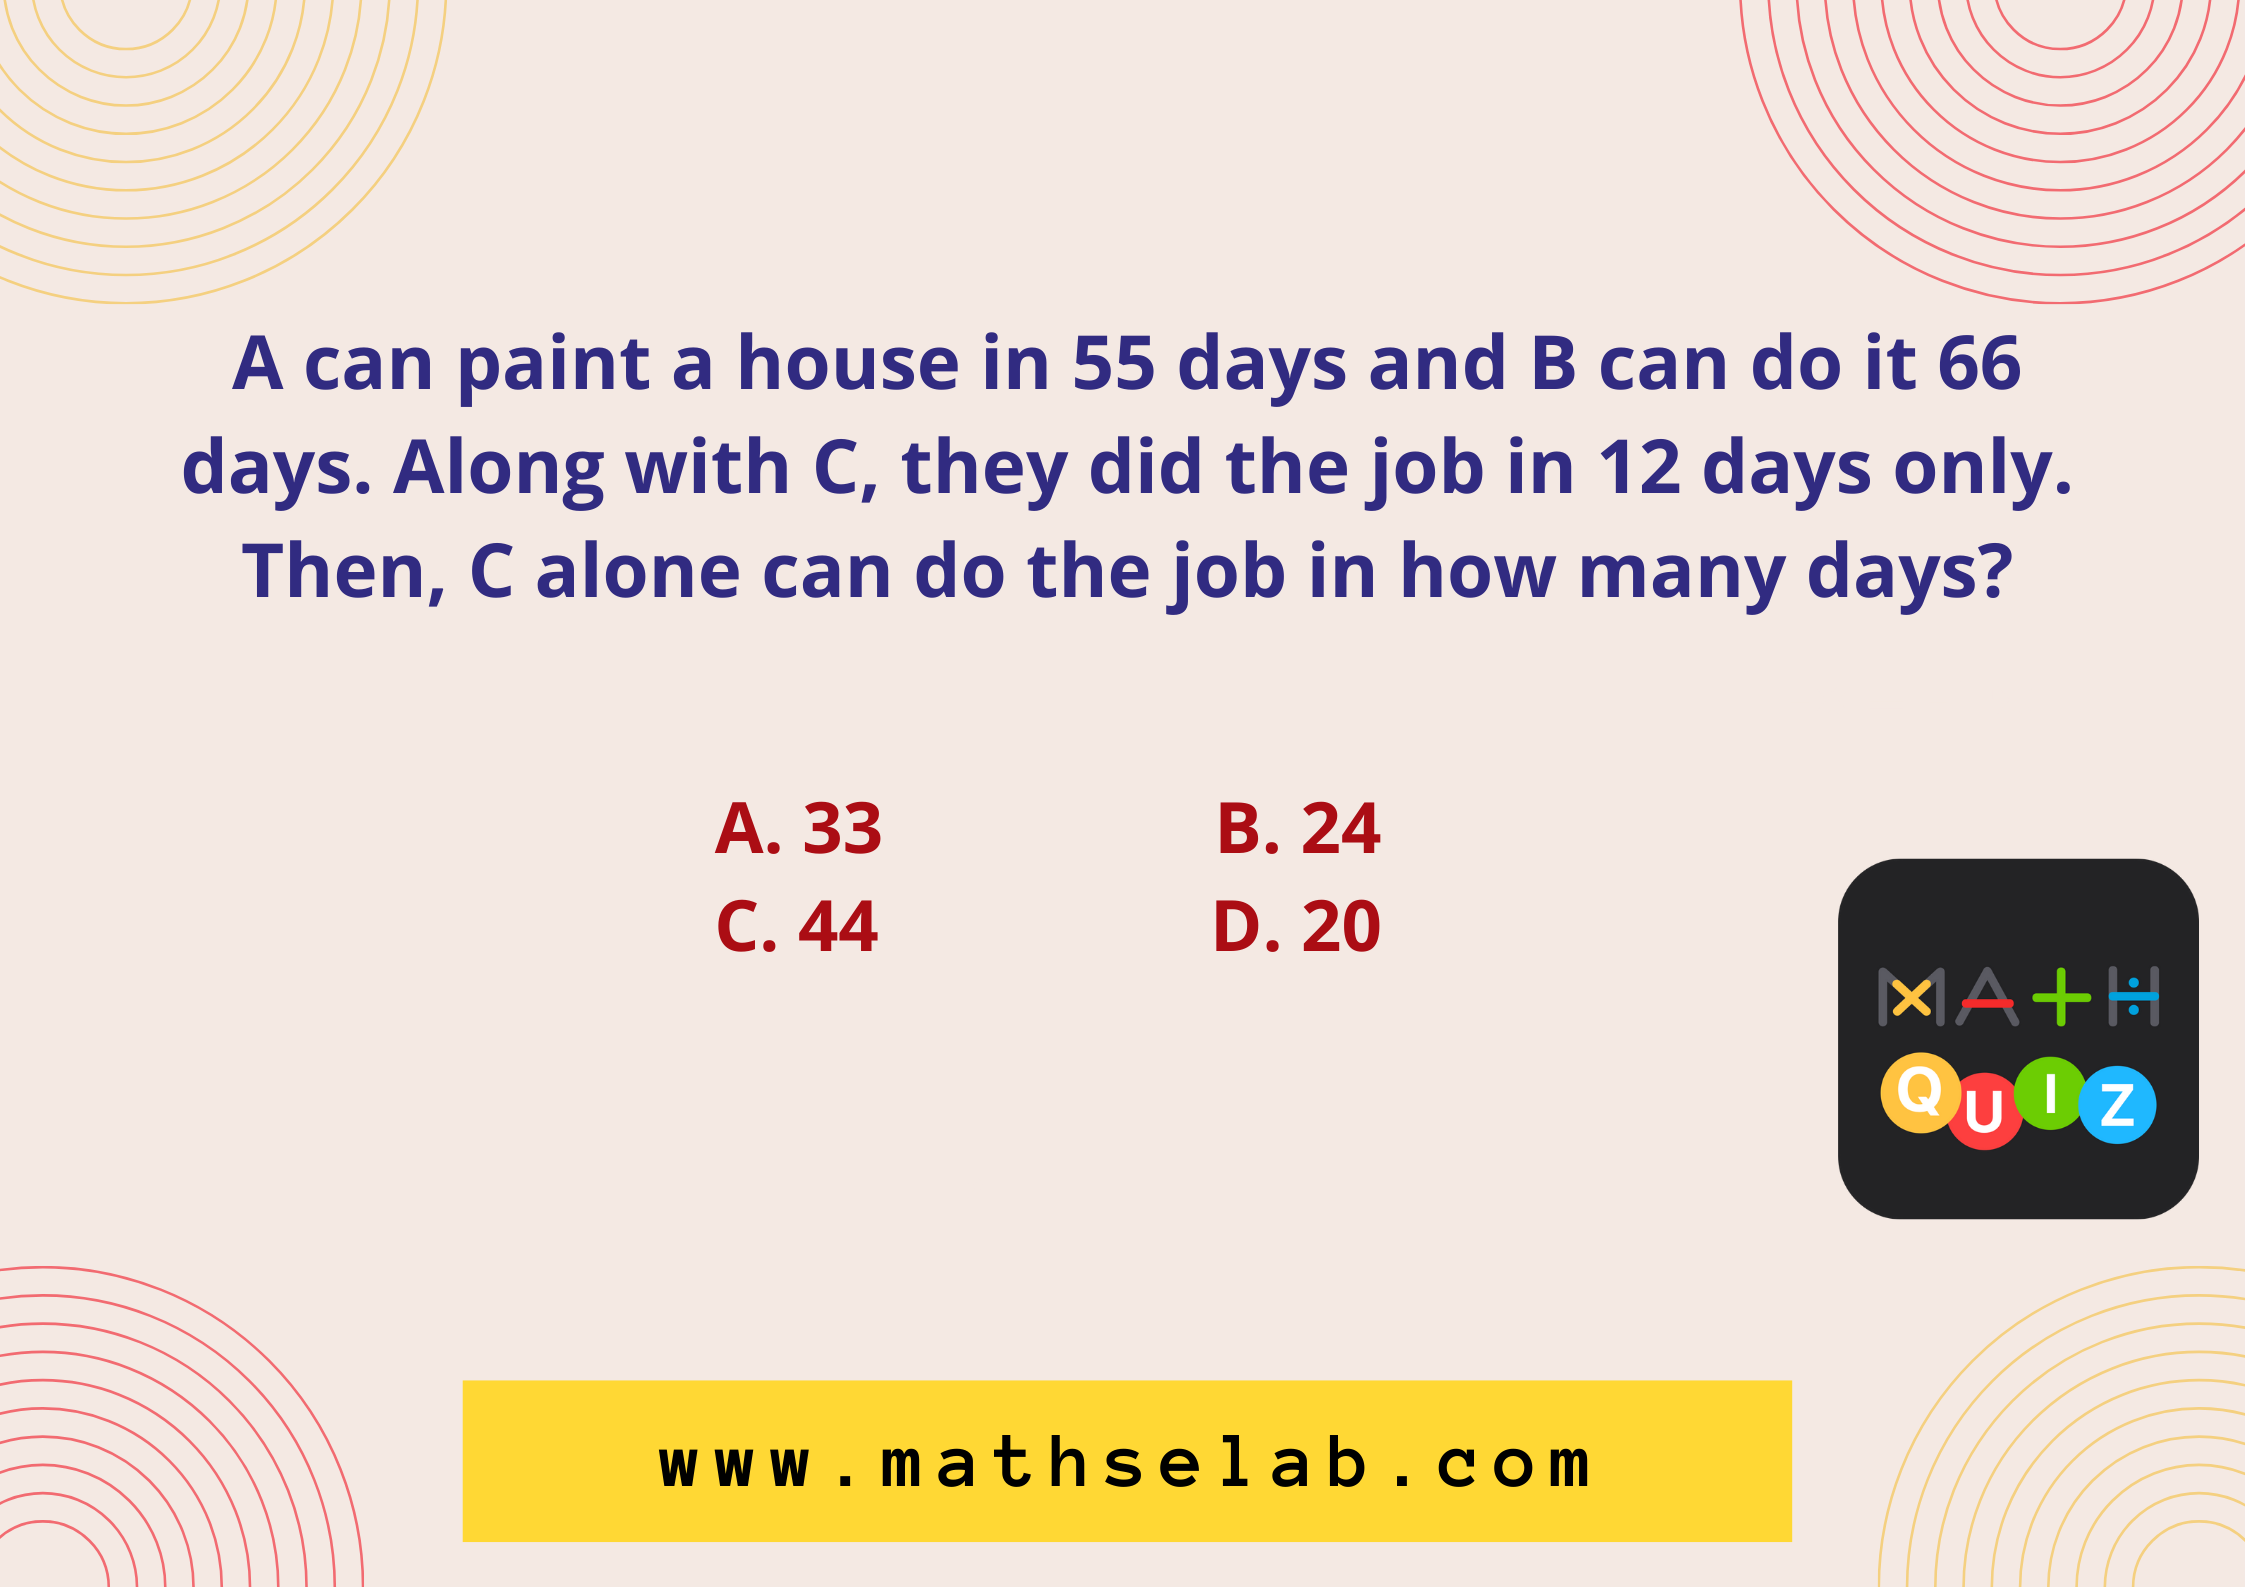 A can paint a house in 55 days and B can do it 66 days. Along with C, they did the job in 12 days only. Then, C alone can do the job in how many days?